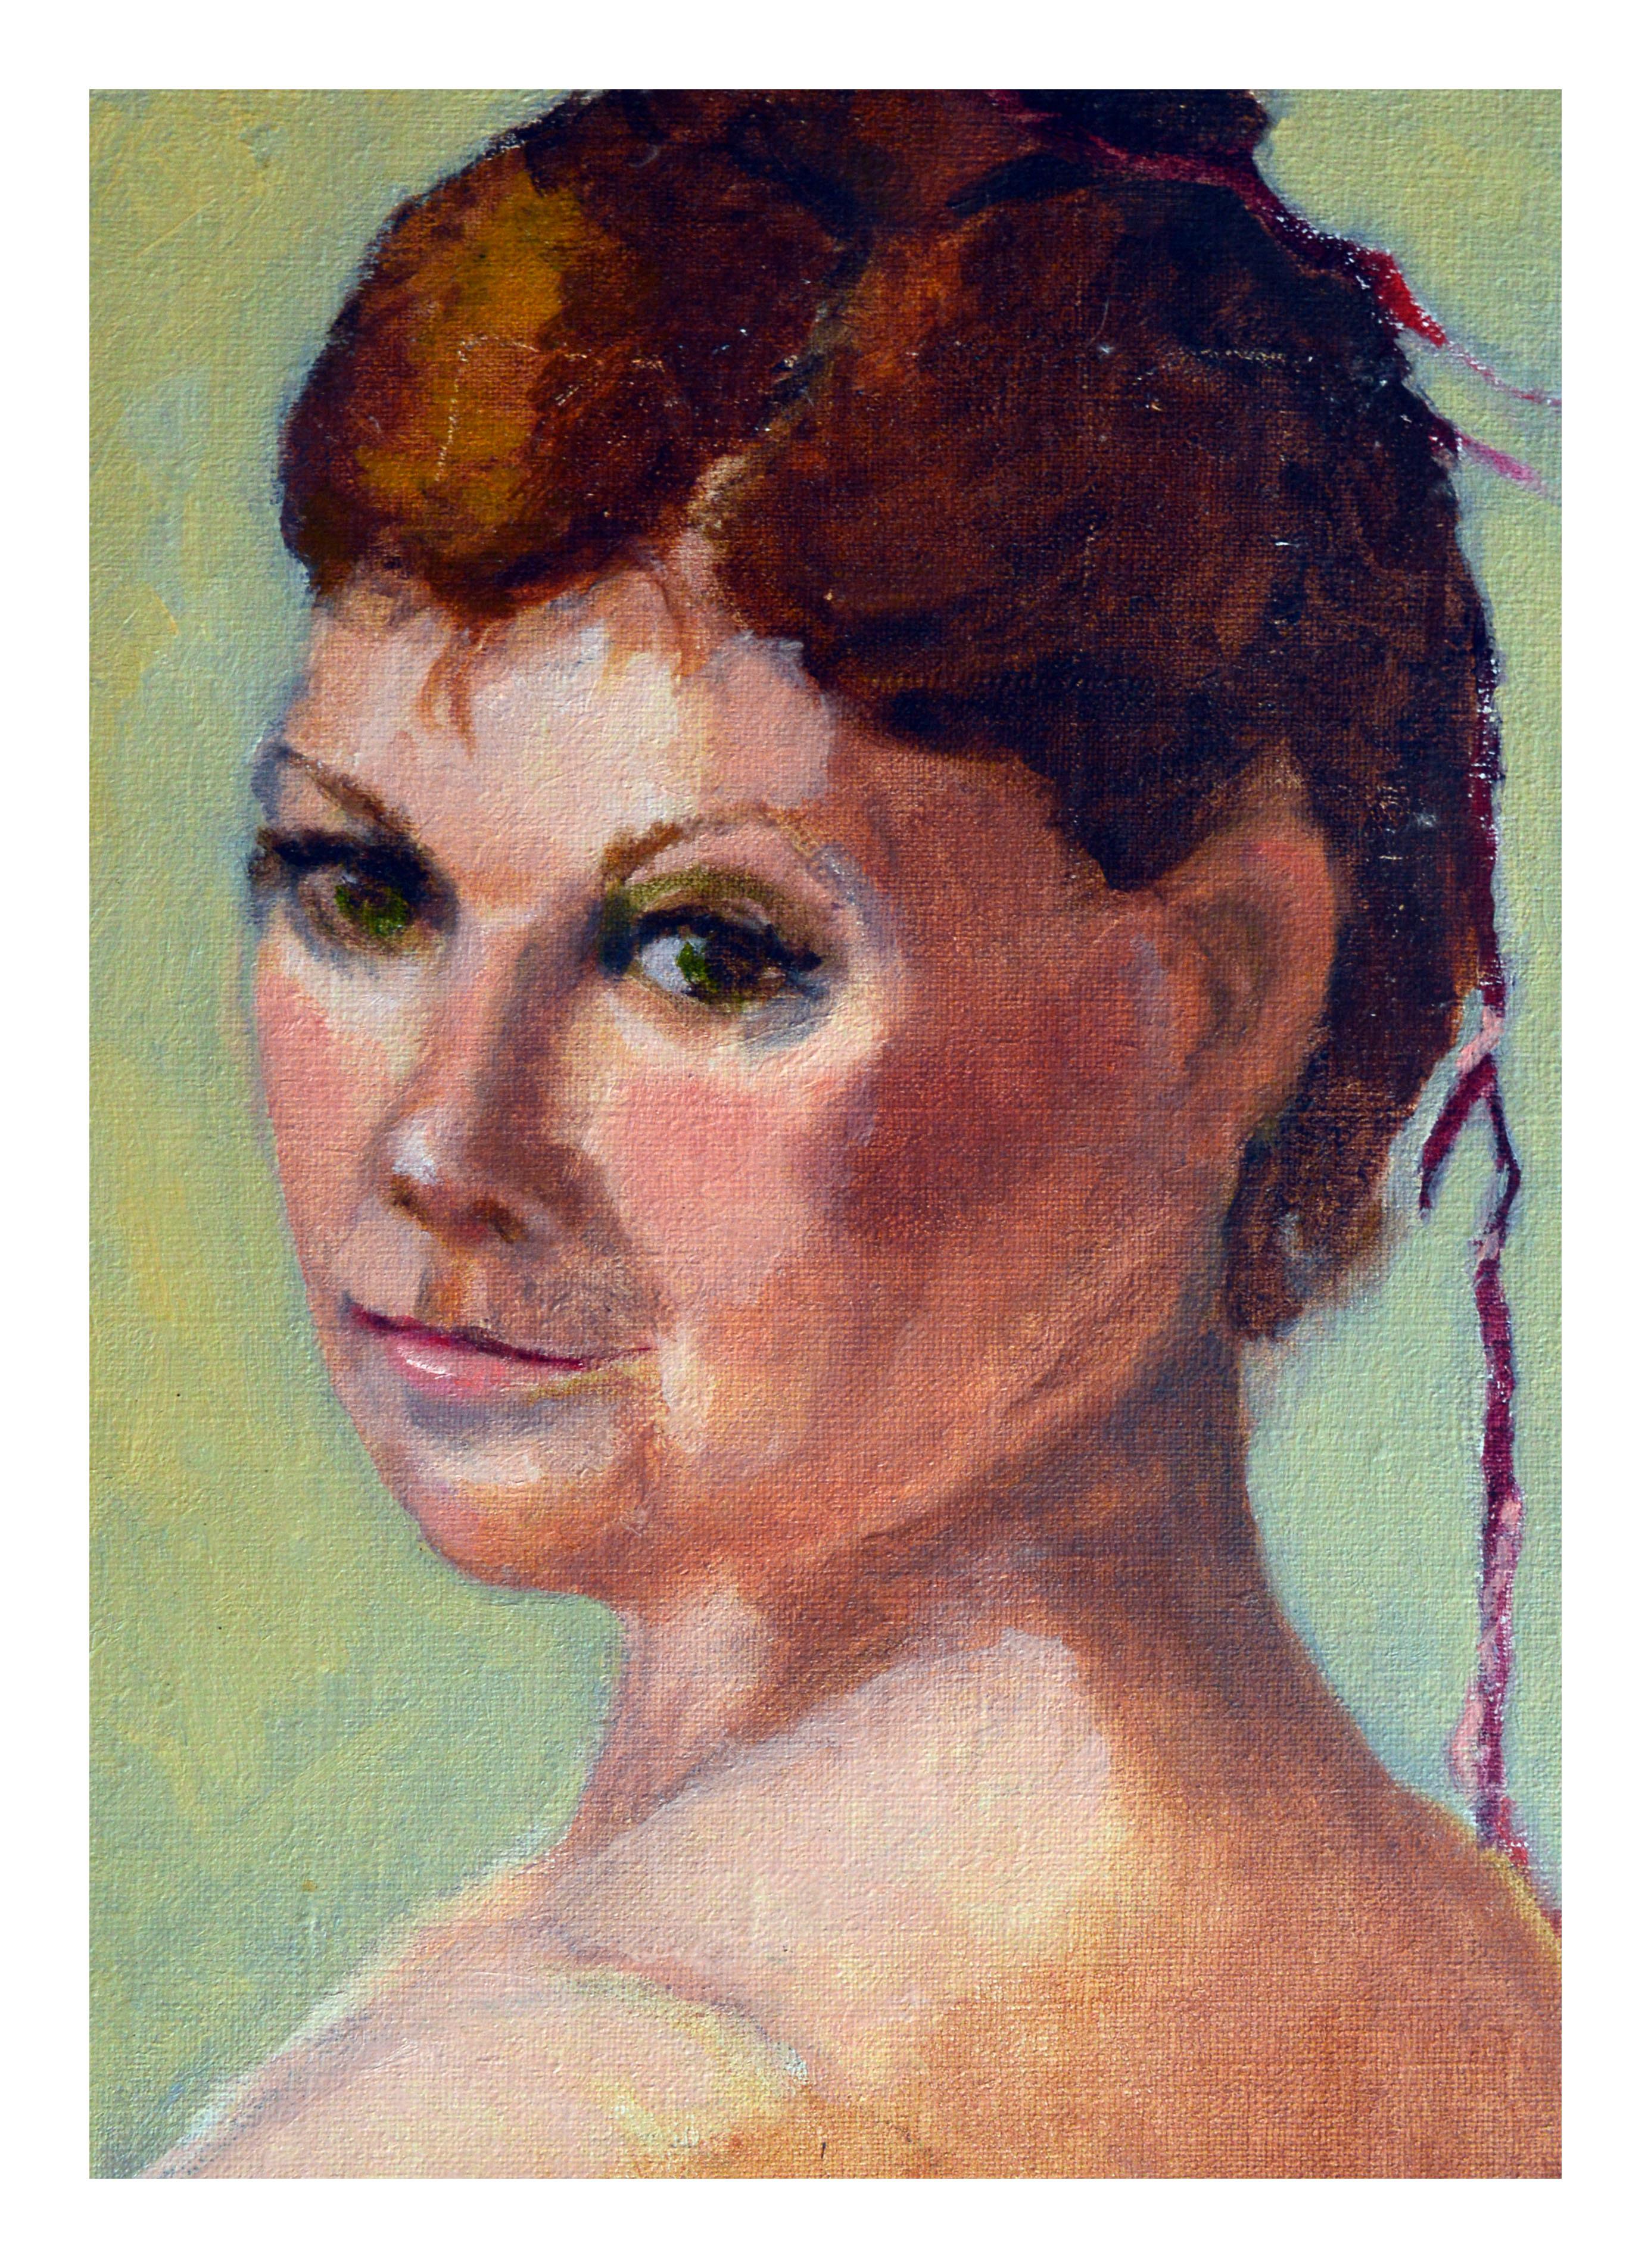 Portrait of a Woman with Green Eyes  - Painting by Patricia Gillfillan